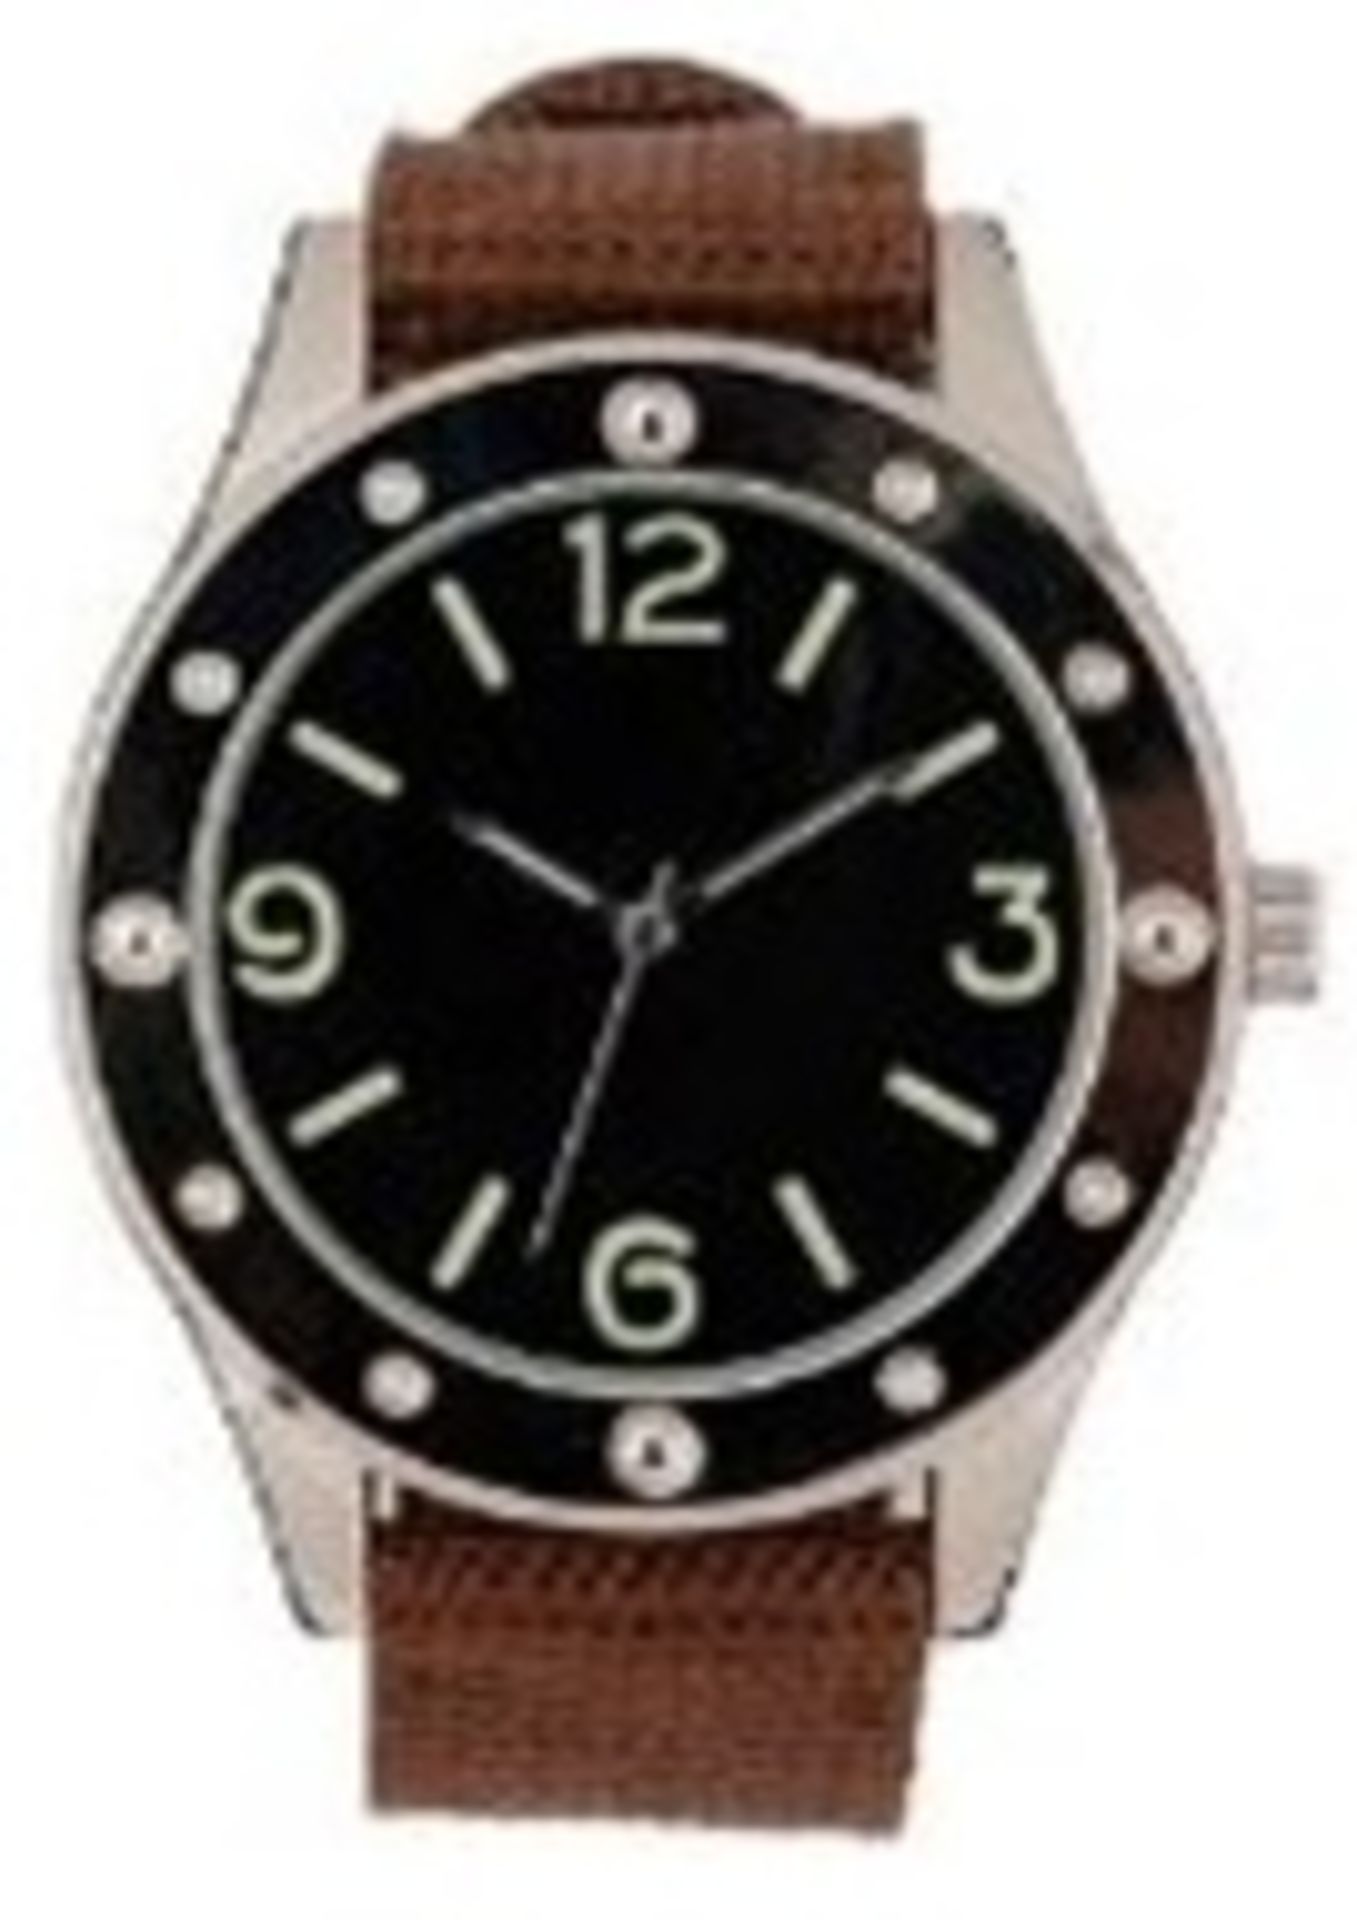 + VAT Brand New Gents 1950s Egyptian Naval Commando Watch with Engraved Back in Presentation Box